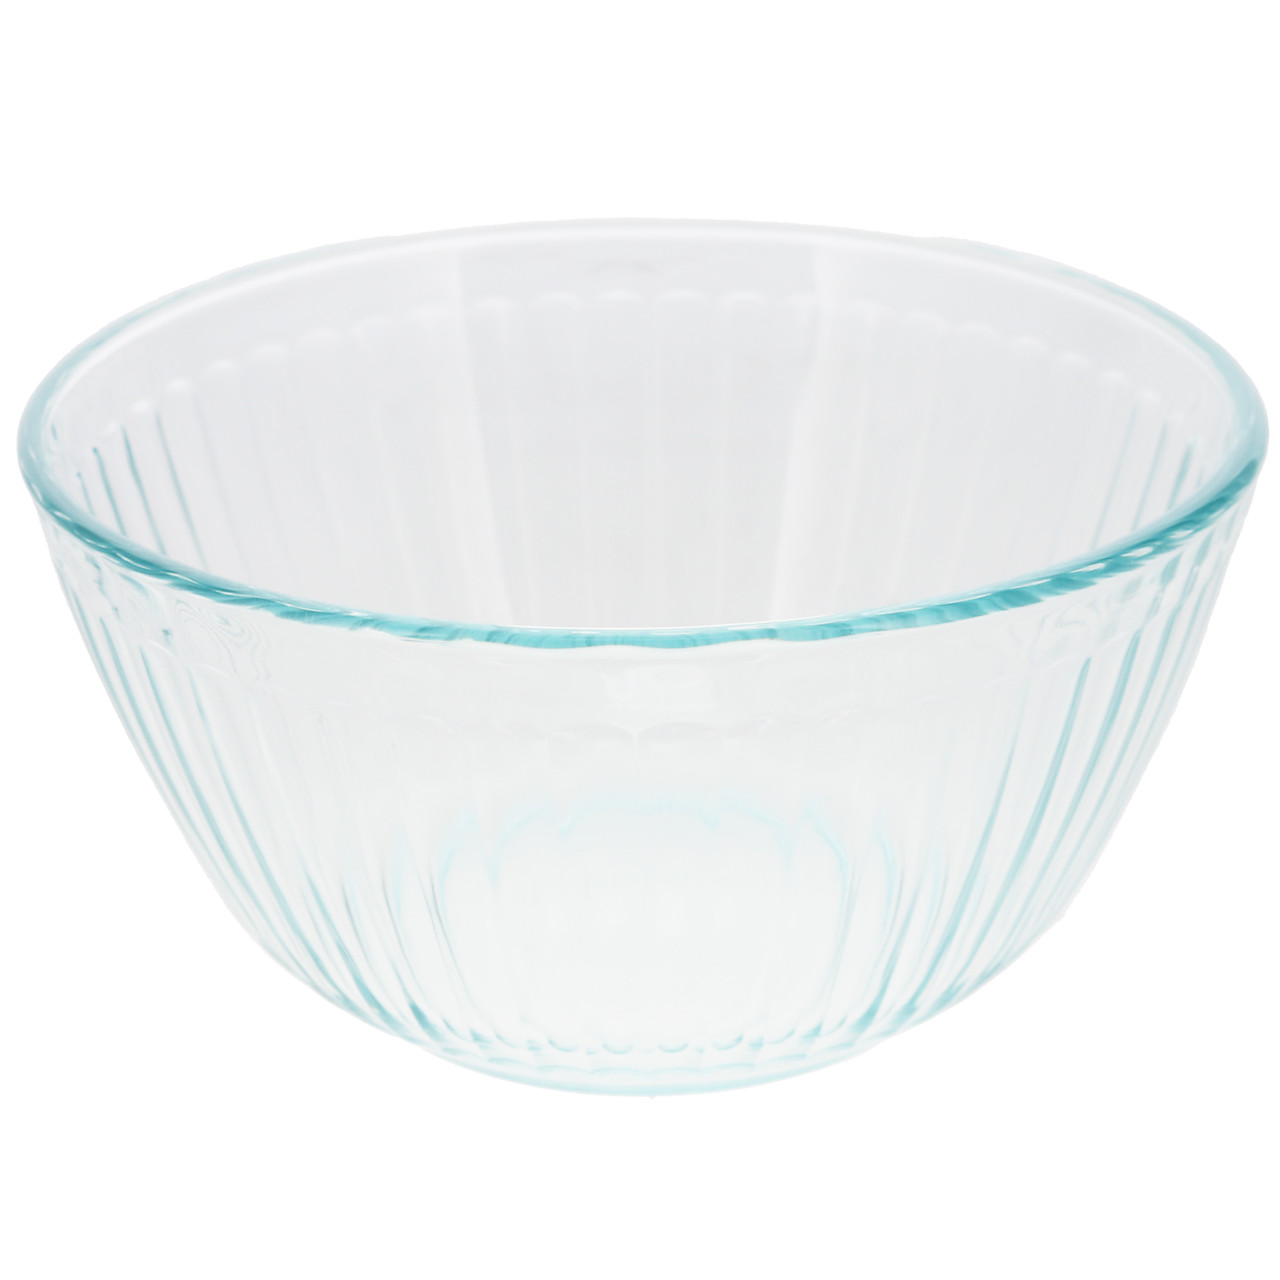 Pyrex 7402 6-Cup Sculpted Glass Mixing Bowl and 7402-PC Blue